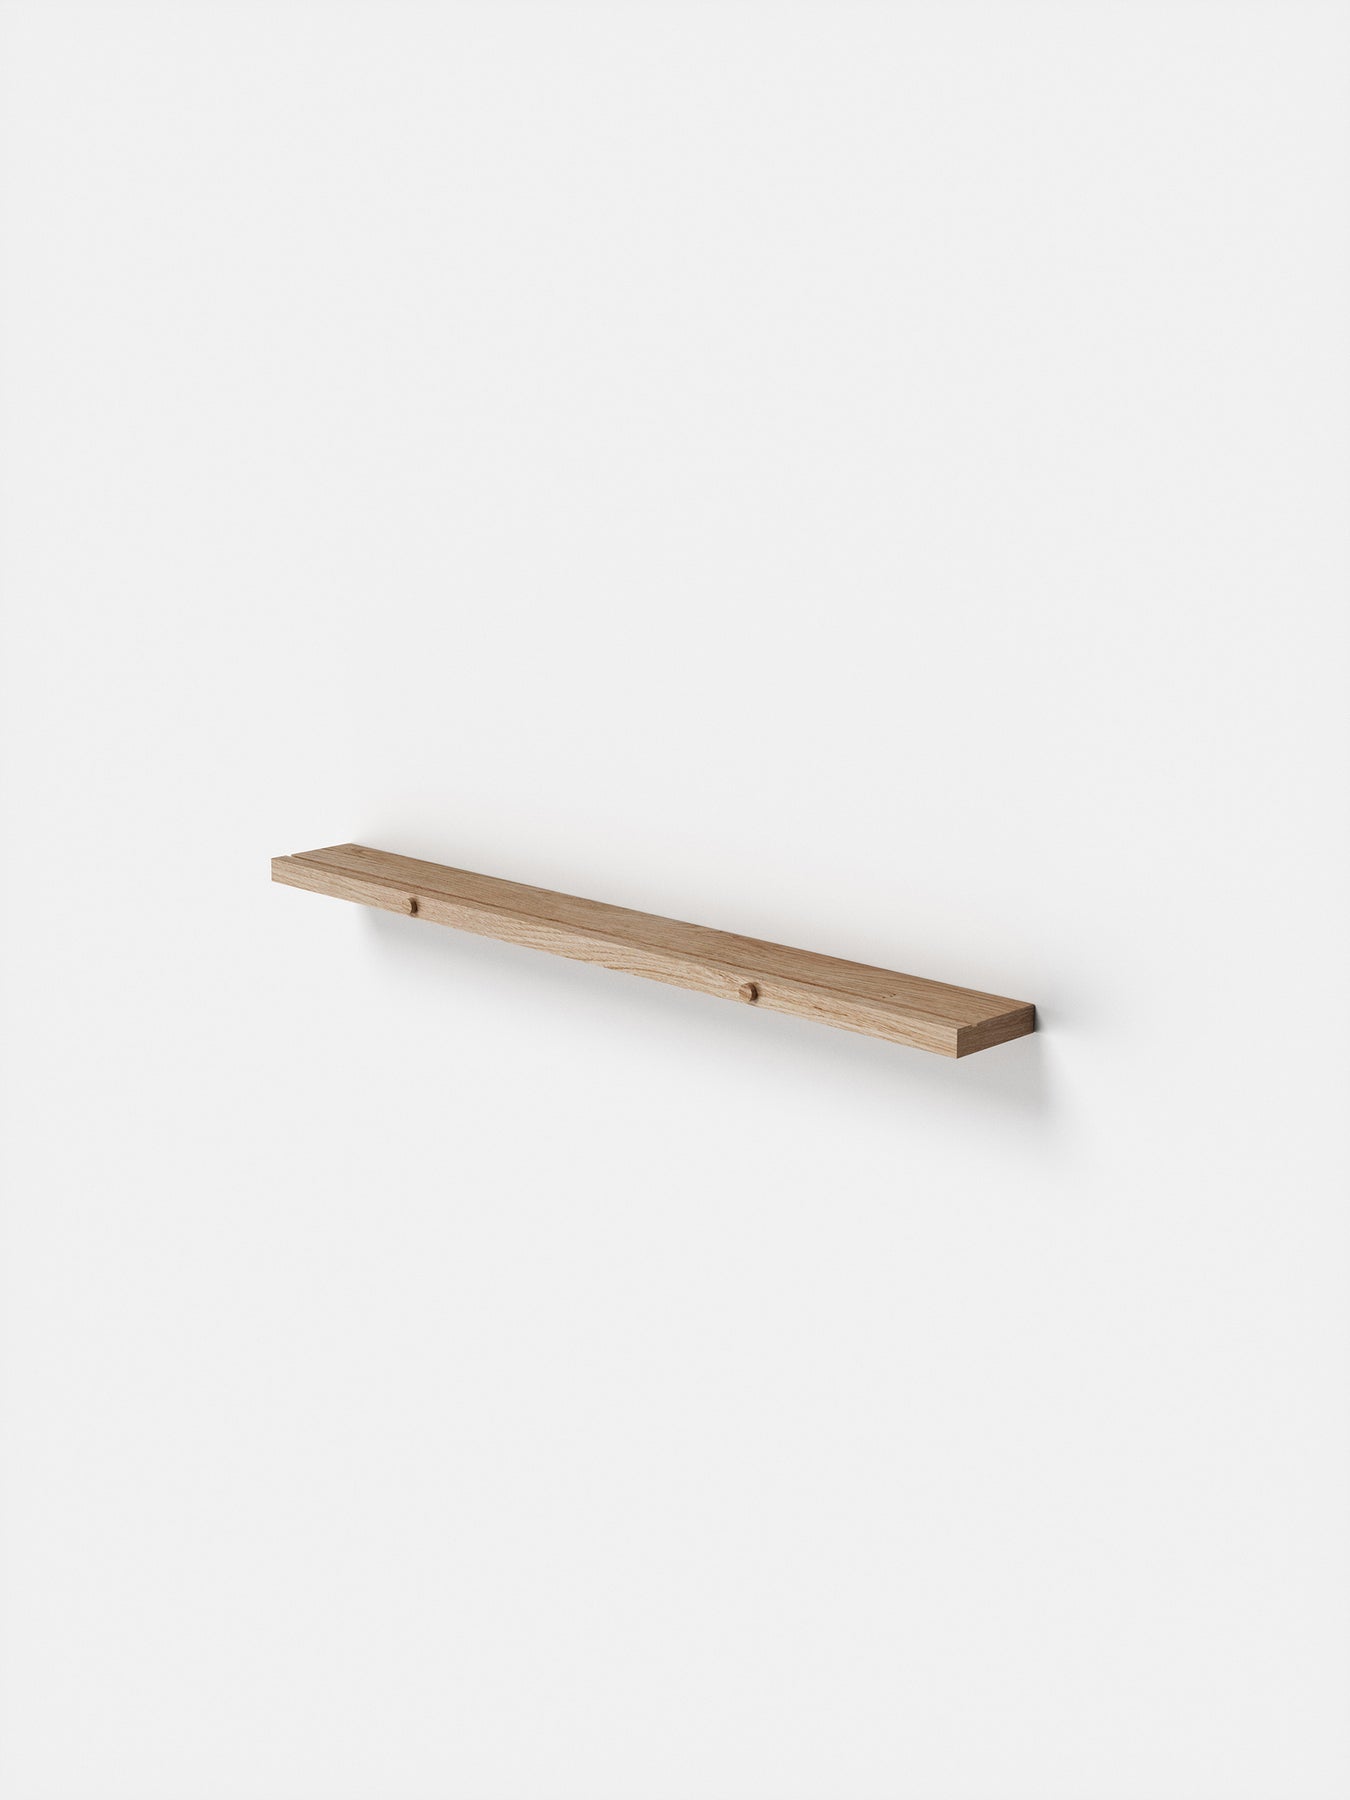 Gallery Shelf by MOEBE | Doing more, with less. – moebe.dk